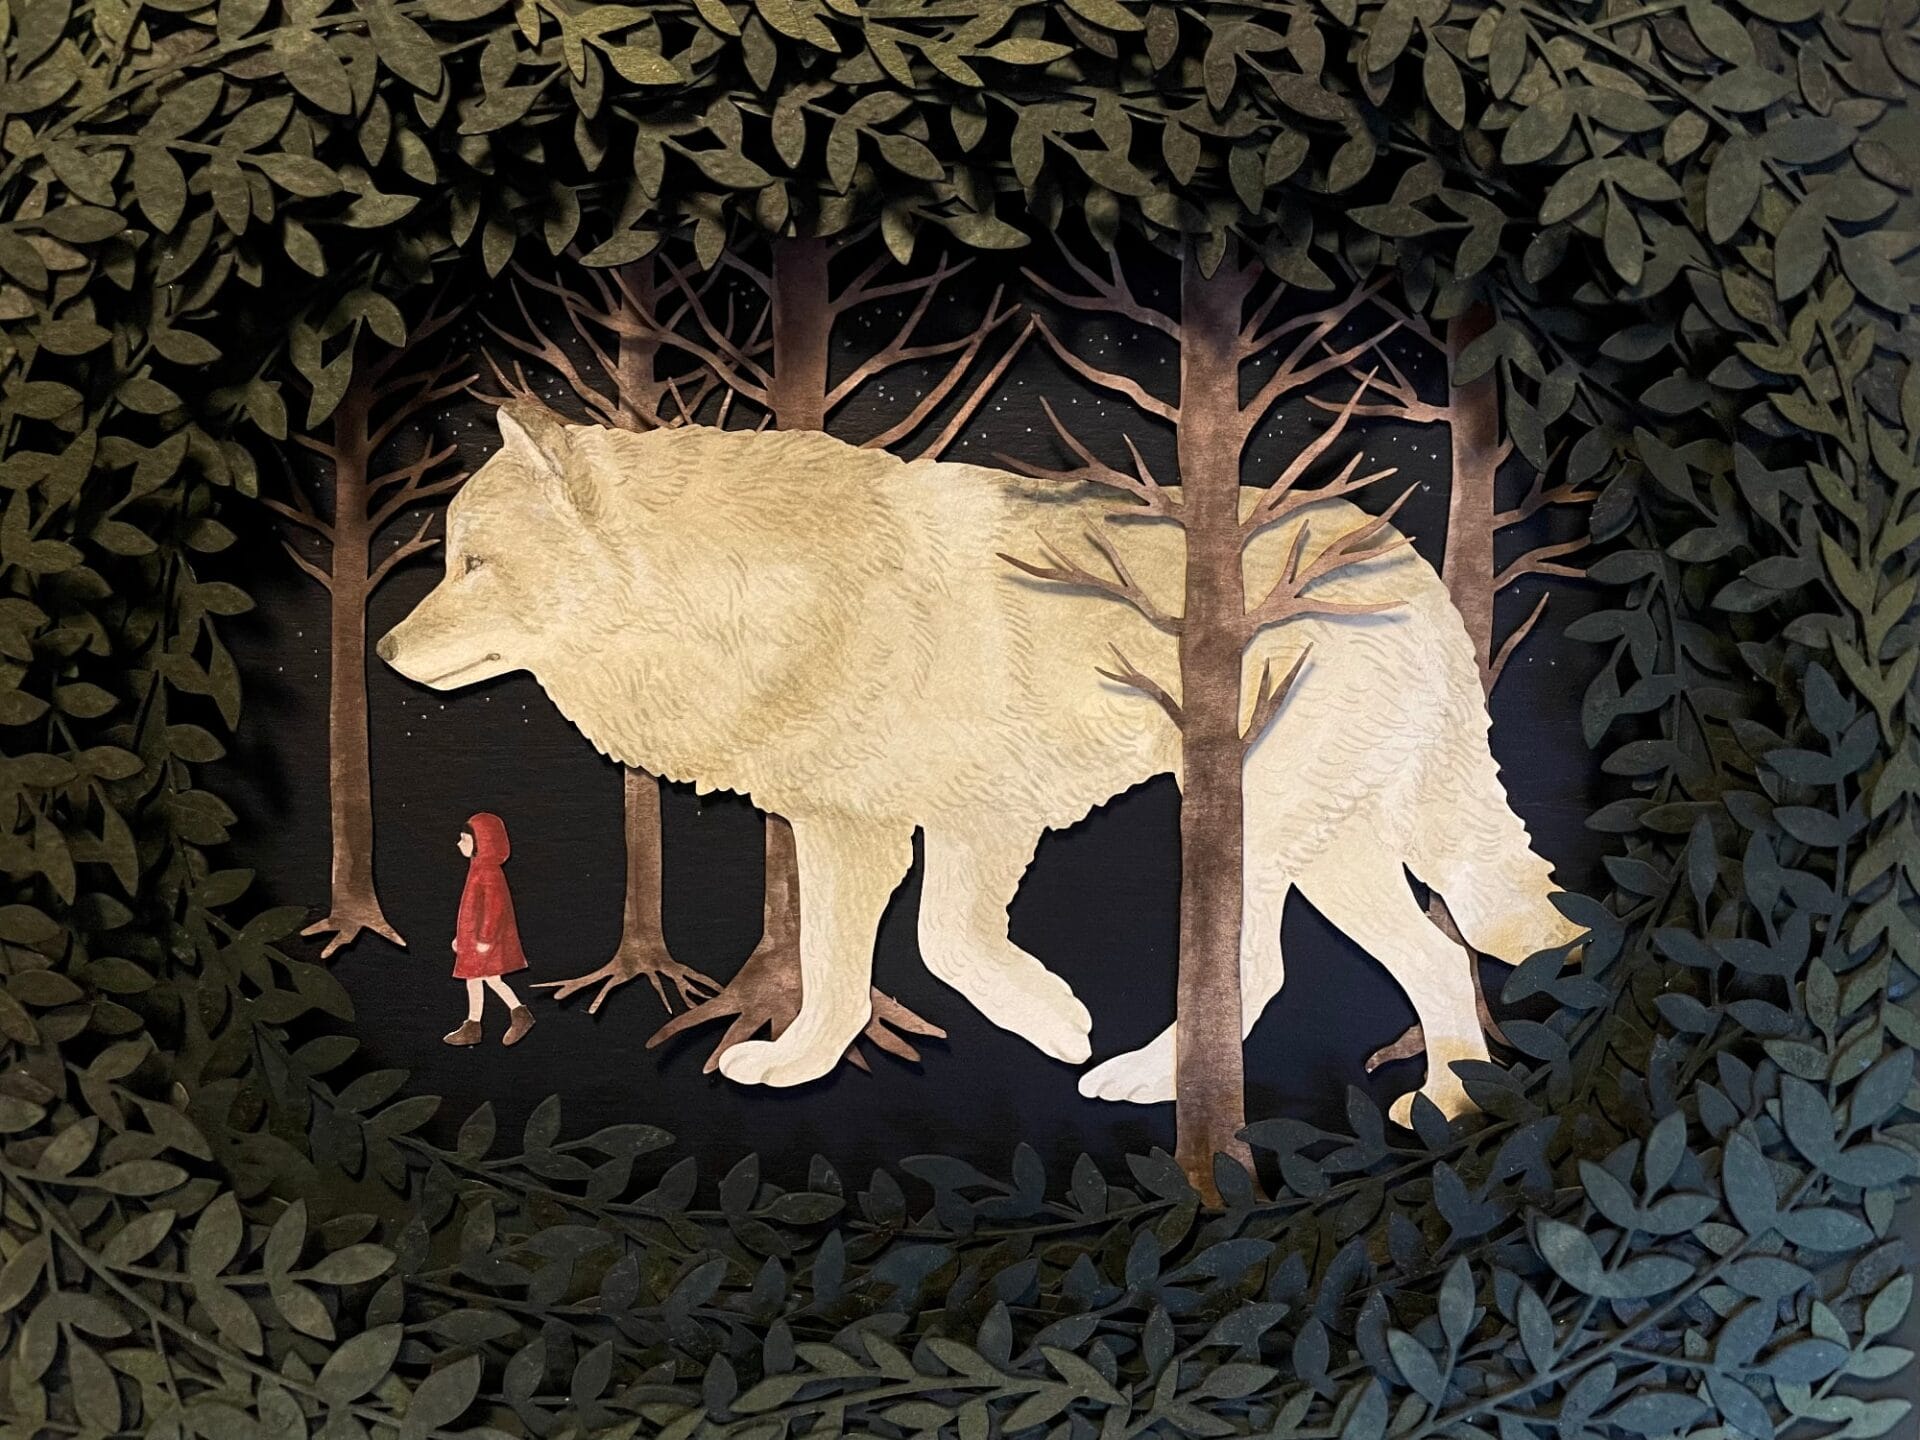 Enormous Animals with Divine Powers Populate Kanako Abe’s Dreamy Papercuts